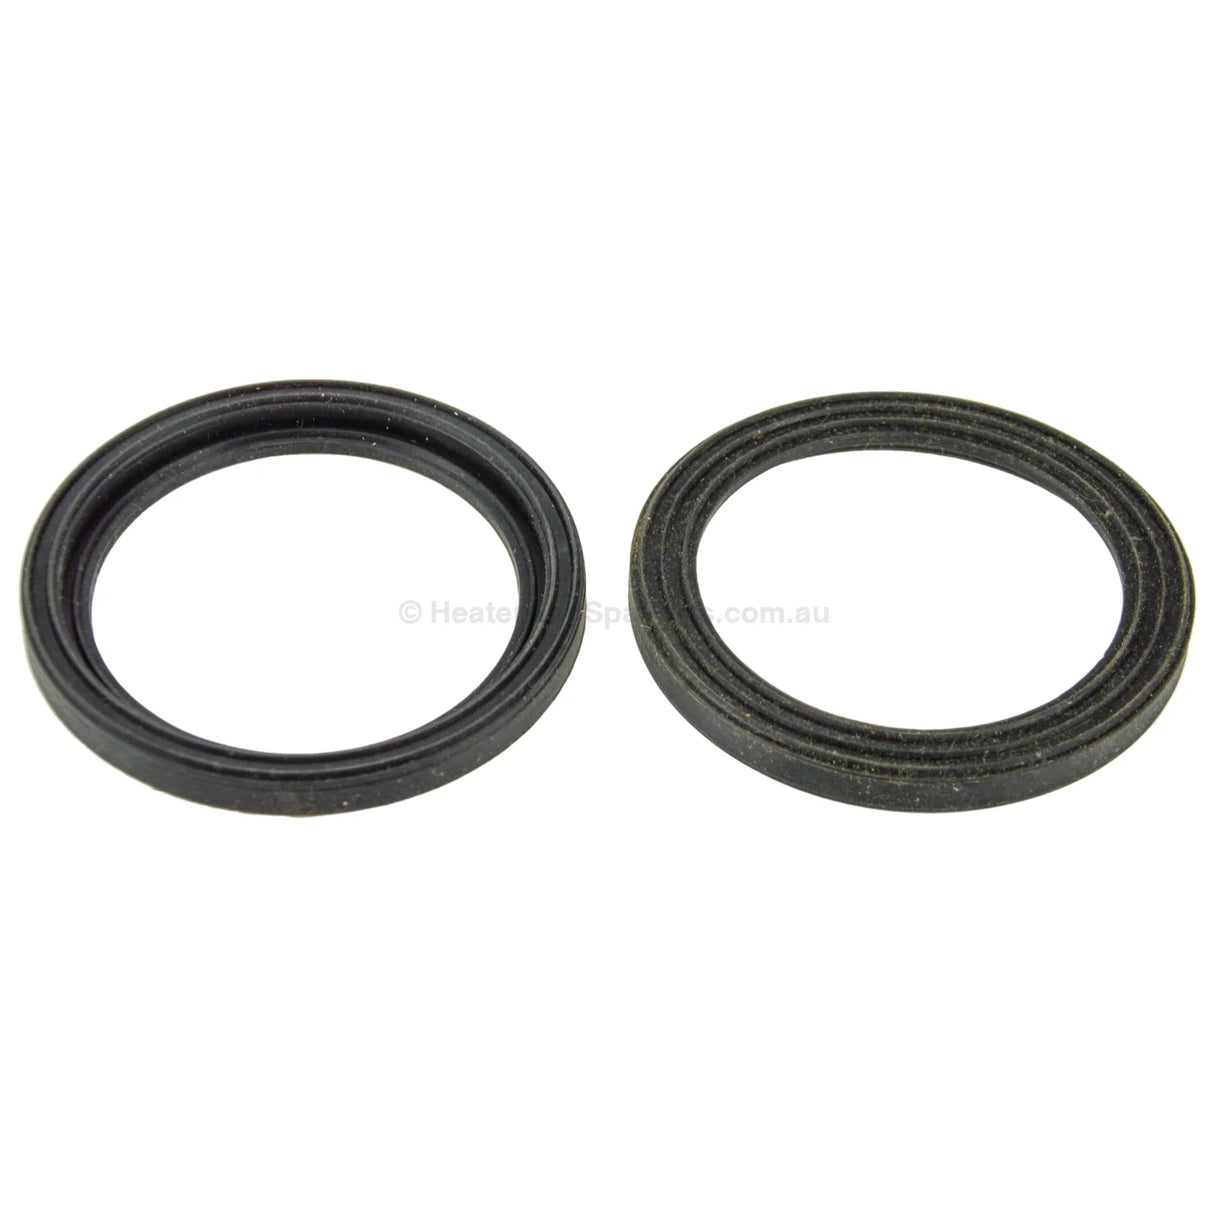 Zink (Ethink) Kl8800 And Kl8 - 3A Series H380 2.0’ Heater Gasket Pair